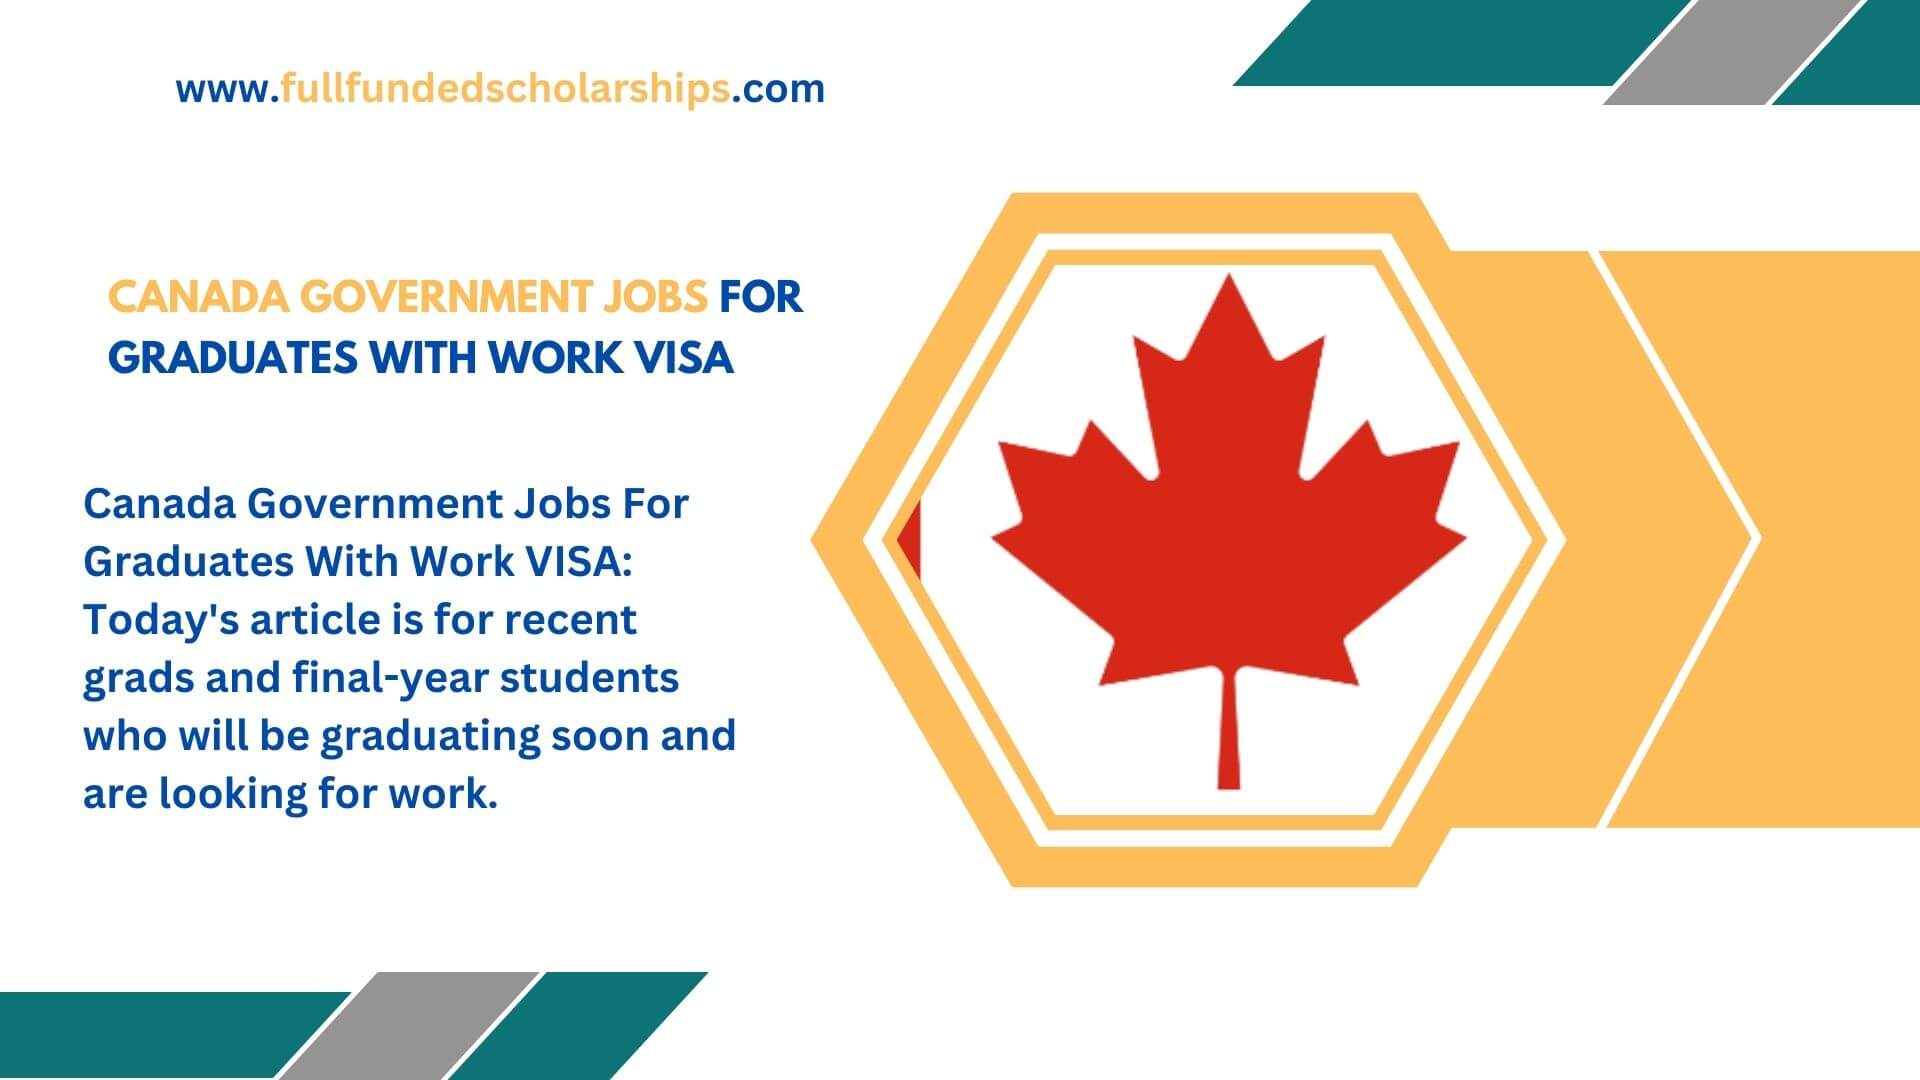 Canada Government Jobs For Graduates With Work VISA